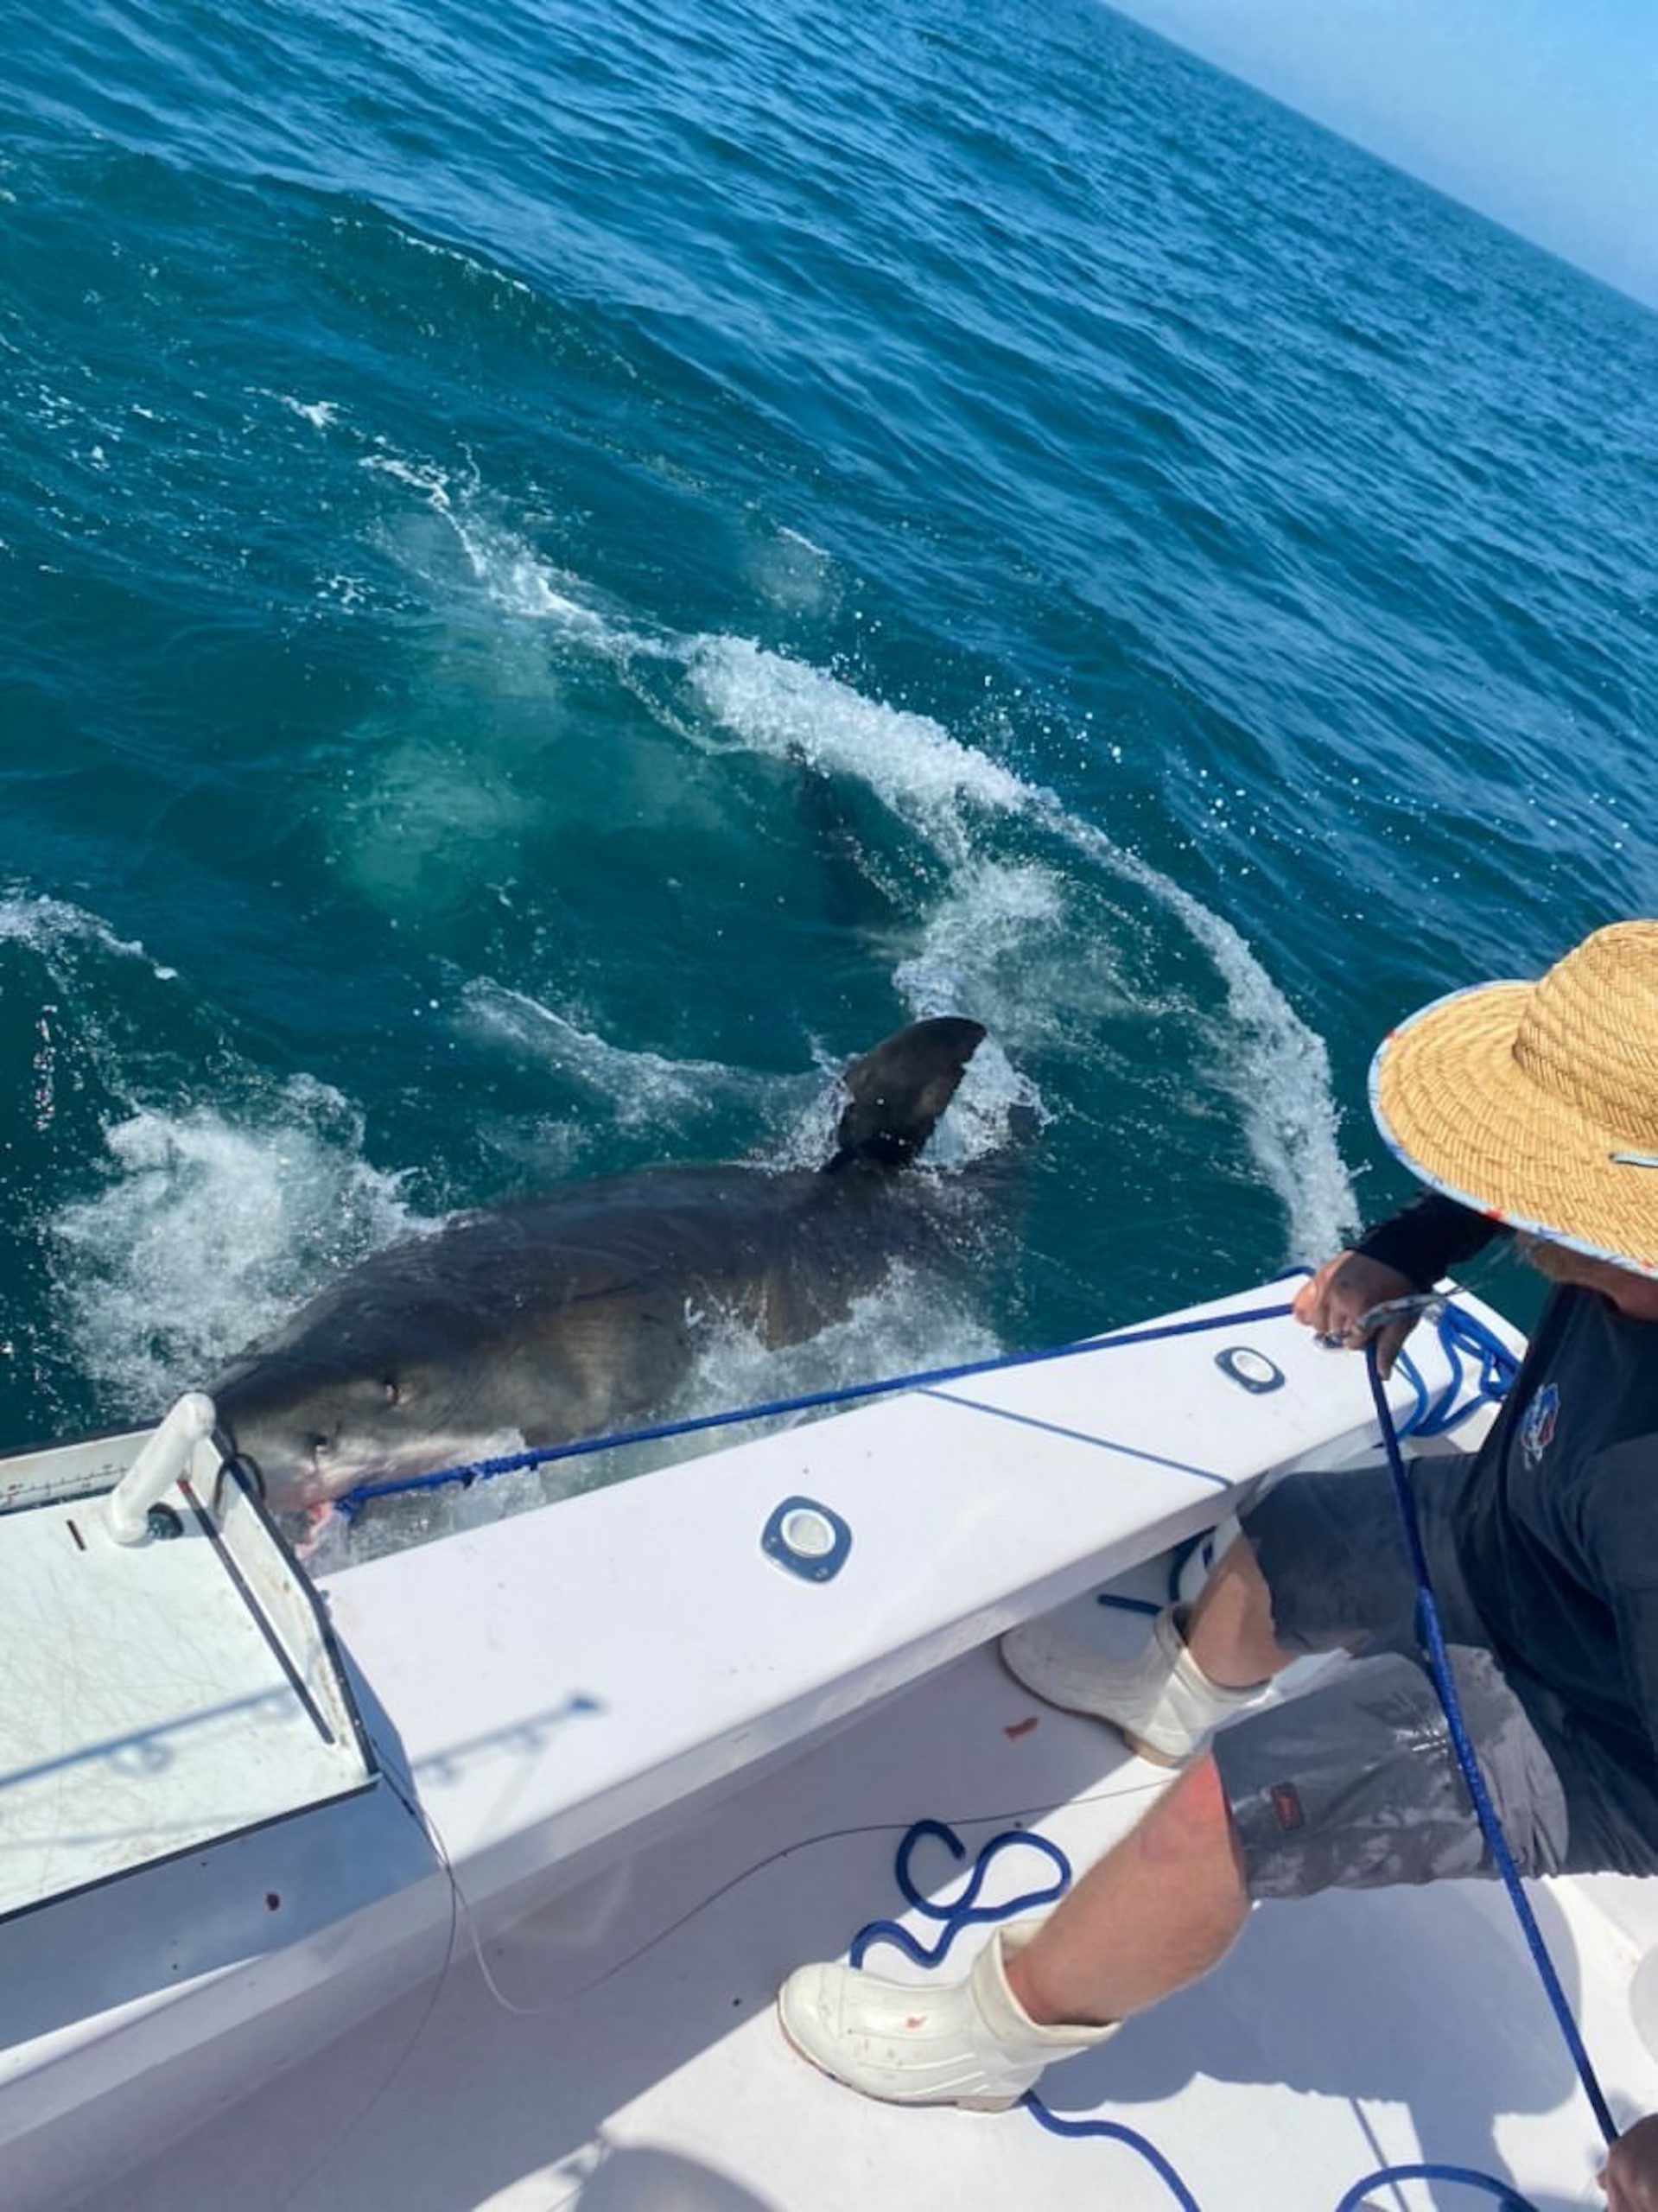 12 Foot Great White Shark Encounter Off of Ocean City, Maryland on Board Miller Time